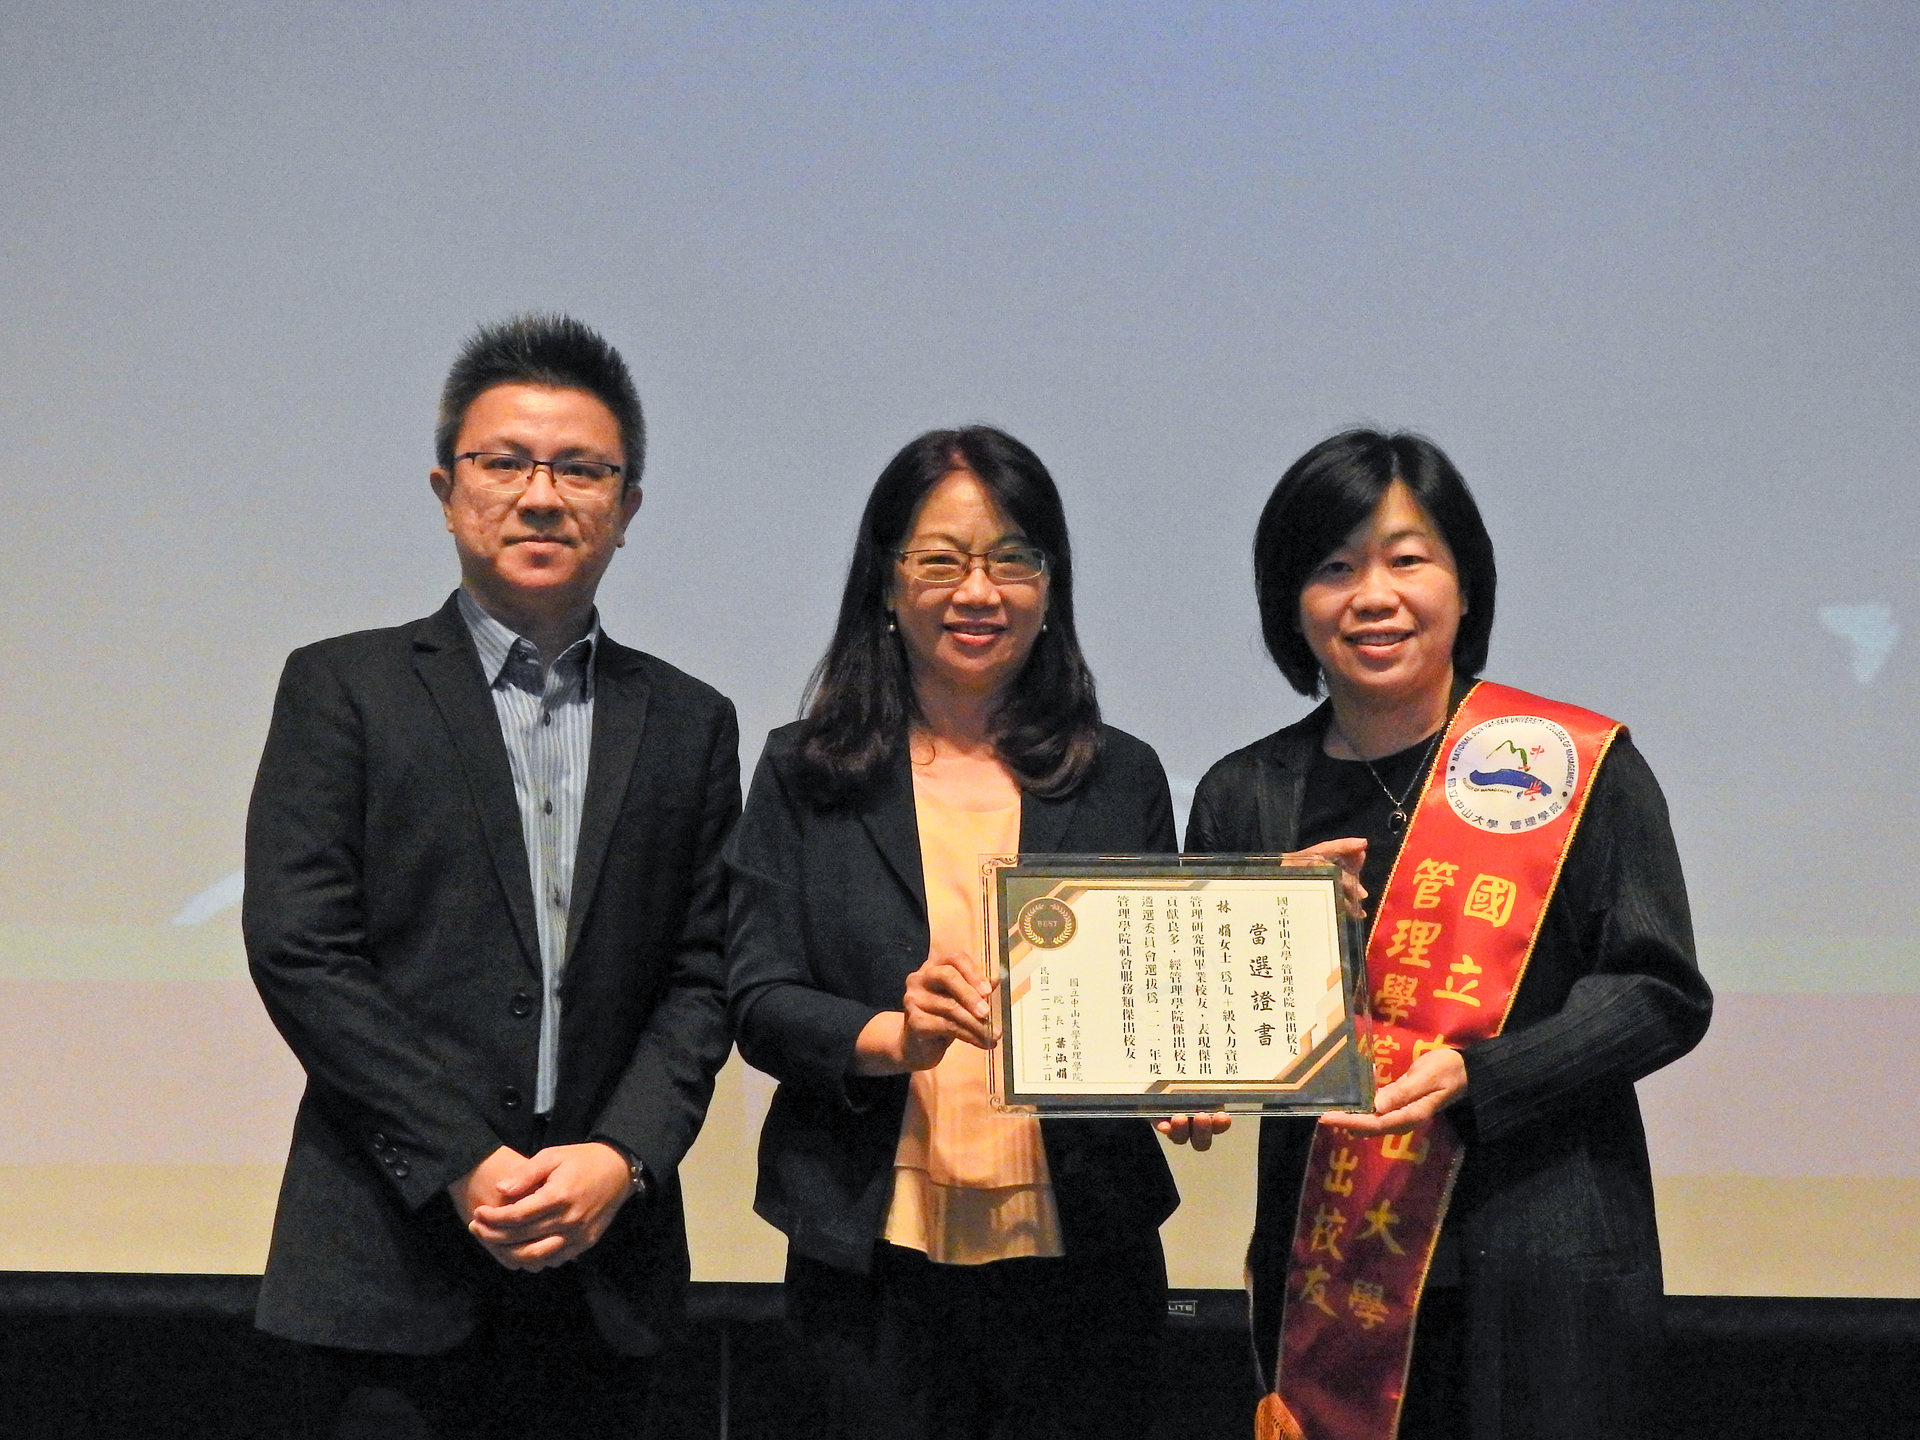 Nai-wen Chi (left) and Shu-chuan Jennifer Yeh (middle), presenting the 2022 Outstanding Alumni Award to Chuan Lin (right)